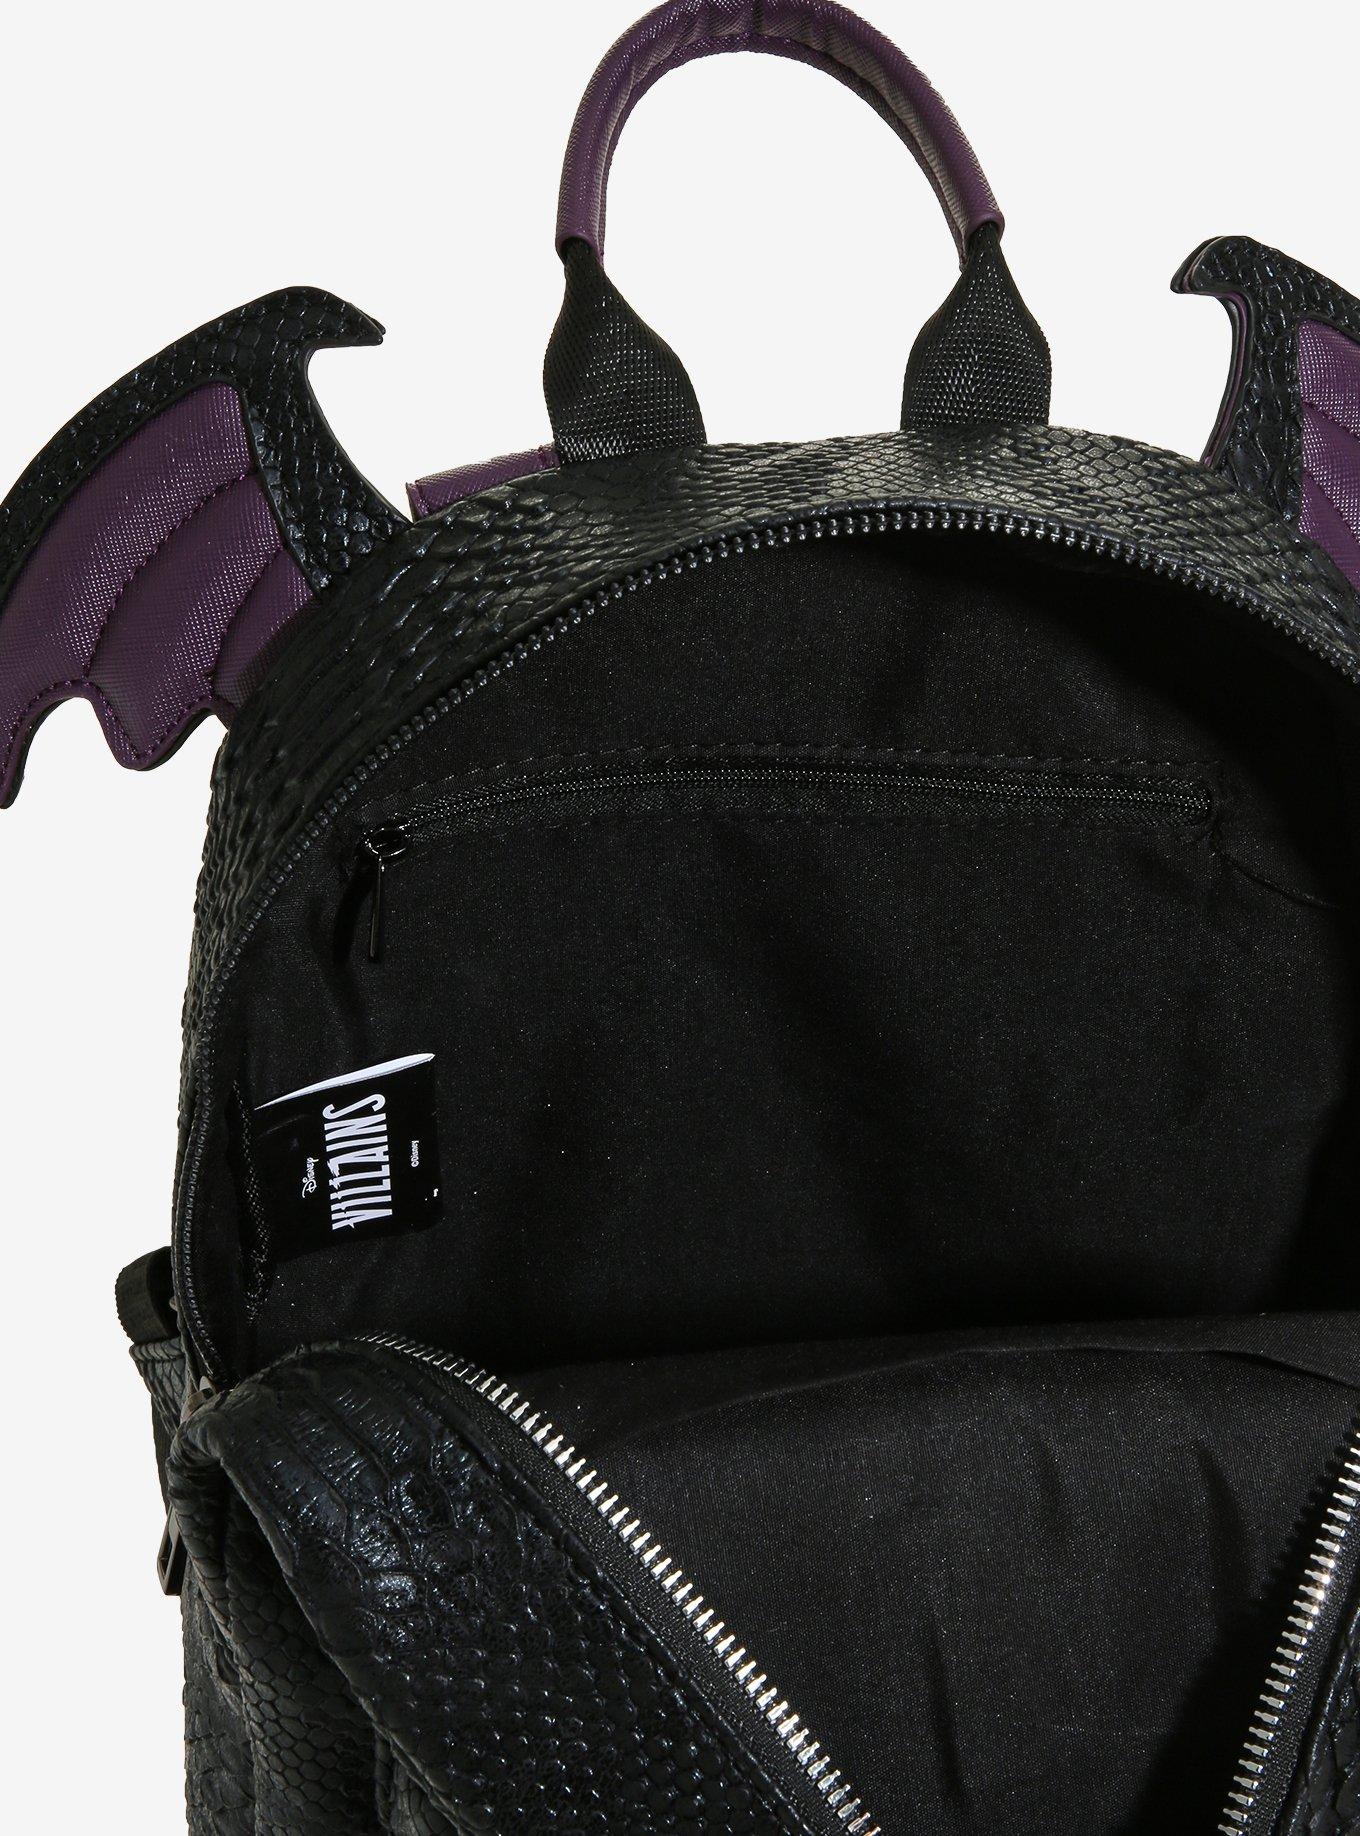 🚦Loungefly Maleficent Dragon Mini Backpack - Glow In The Dark - New!